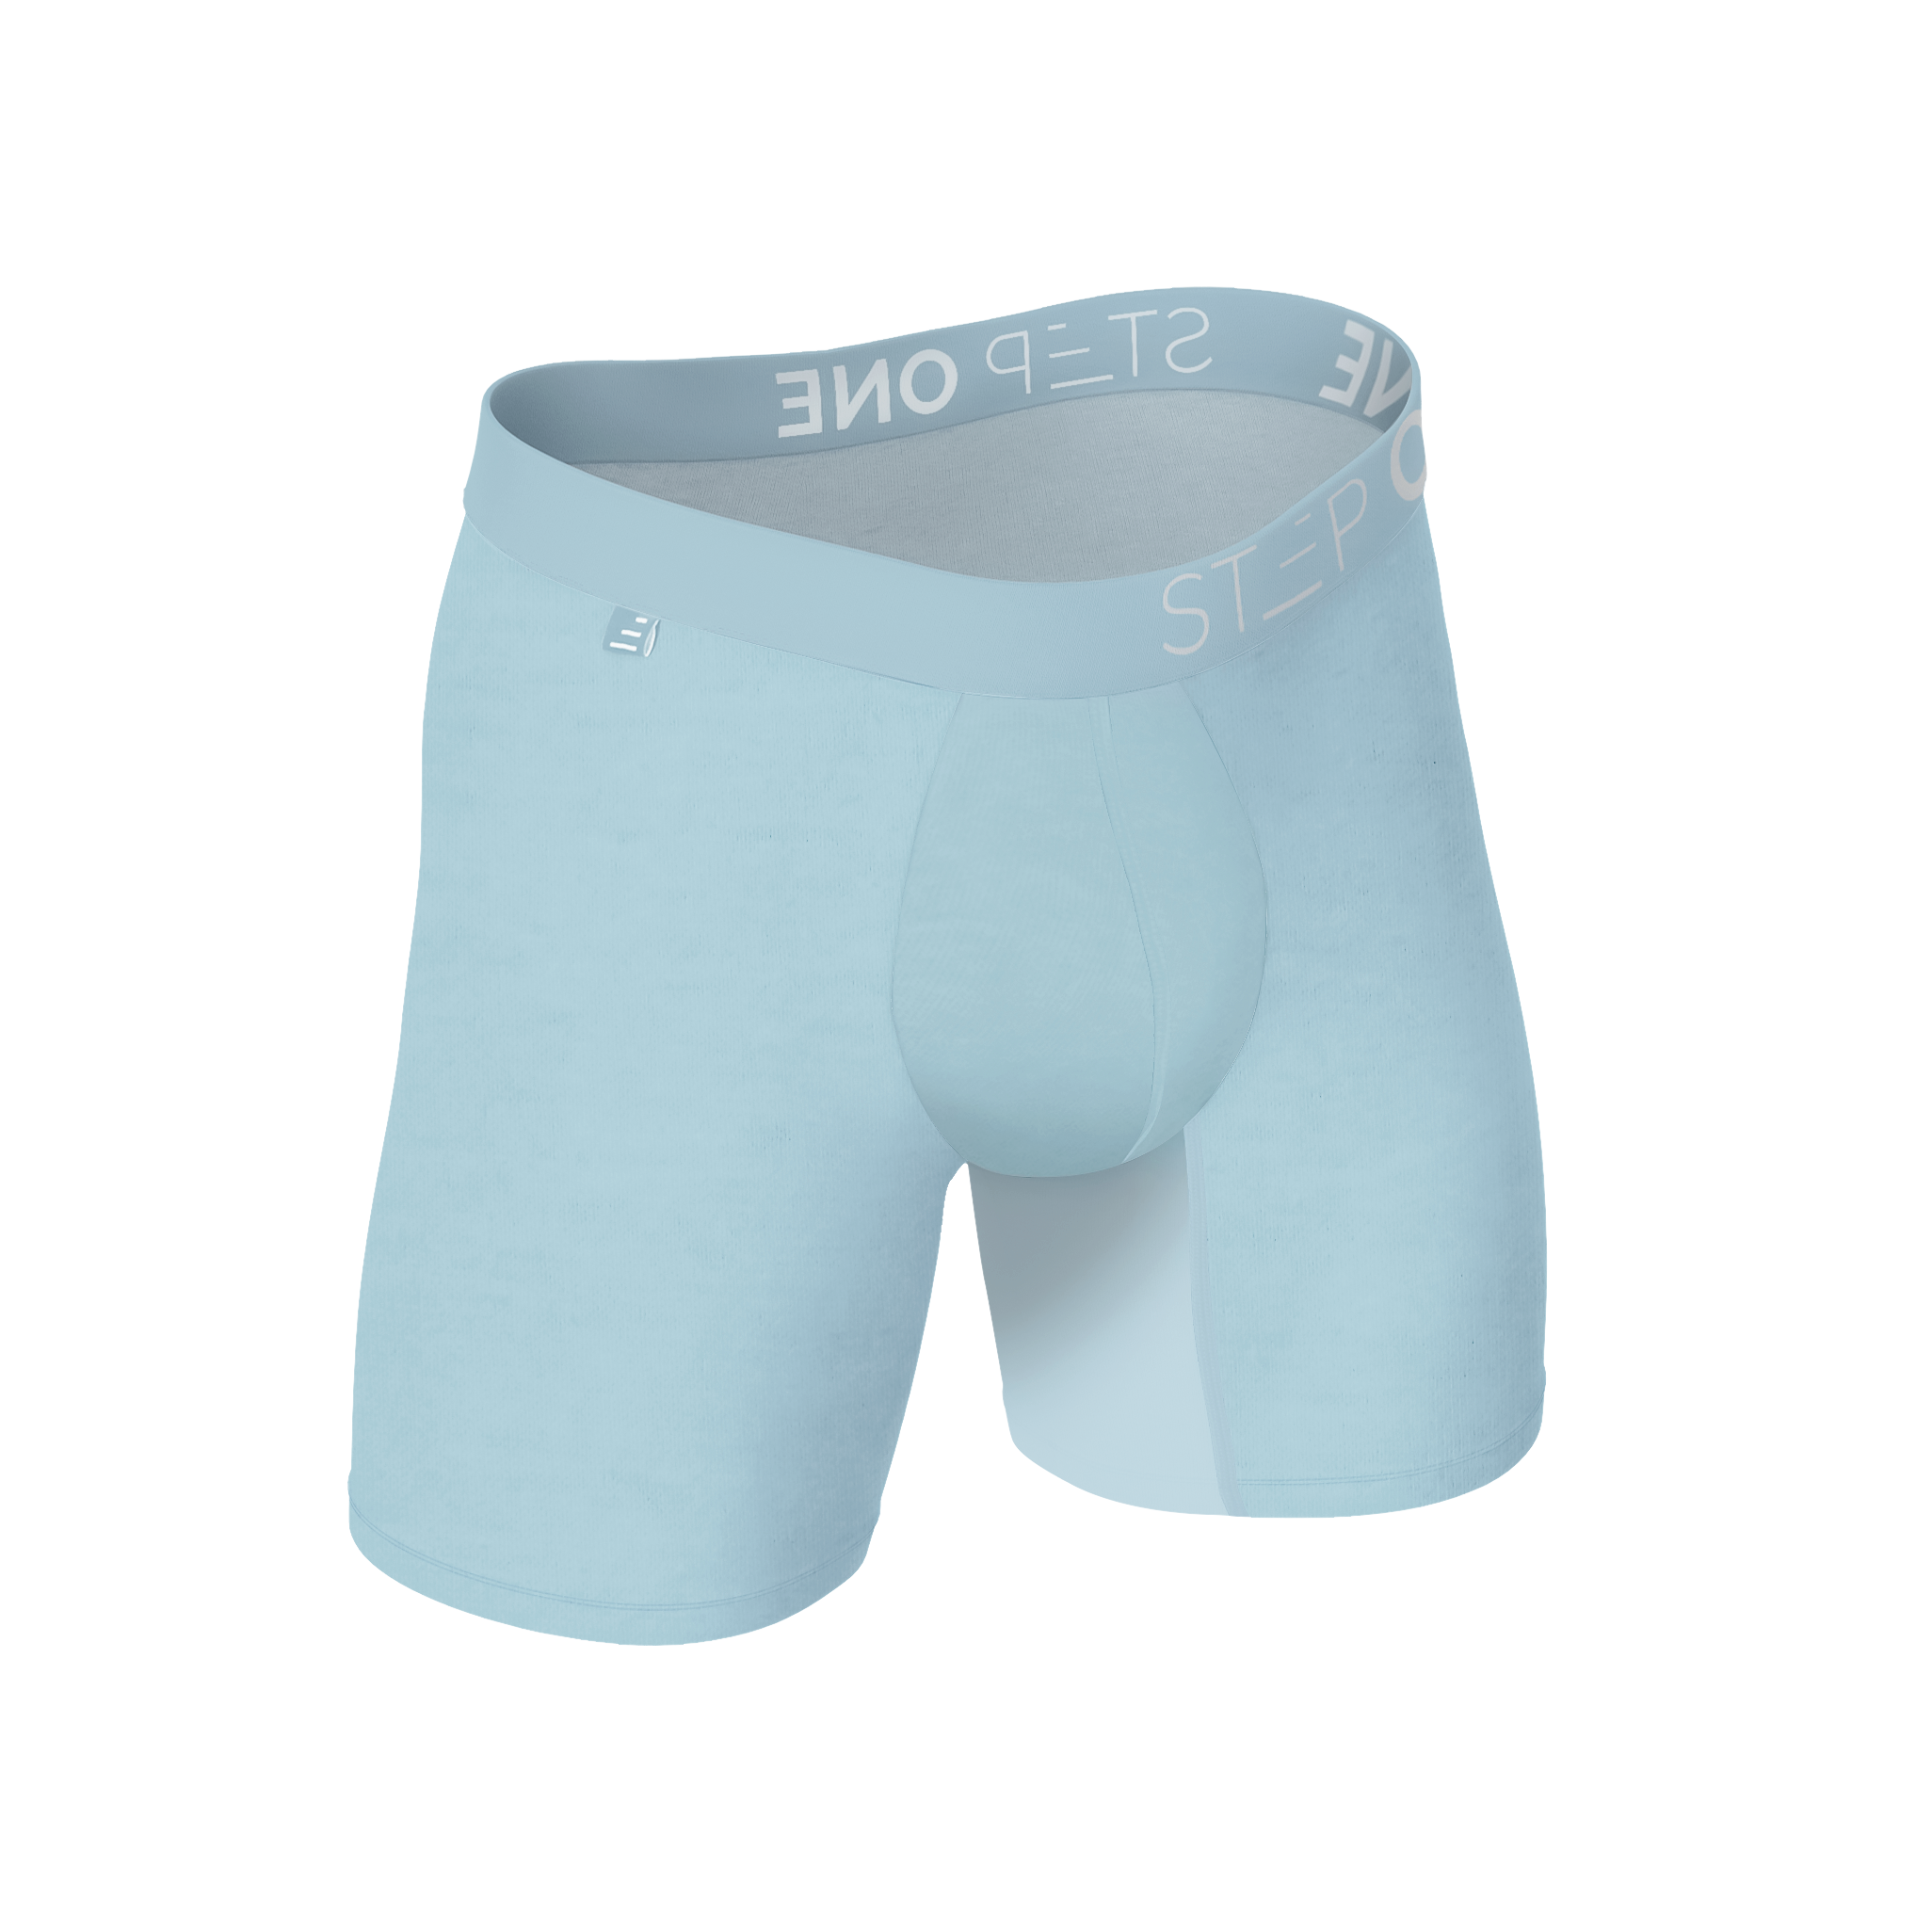 Boxer Brief - Ice Cubes - View 5